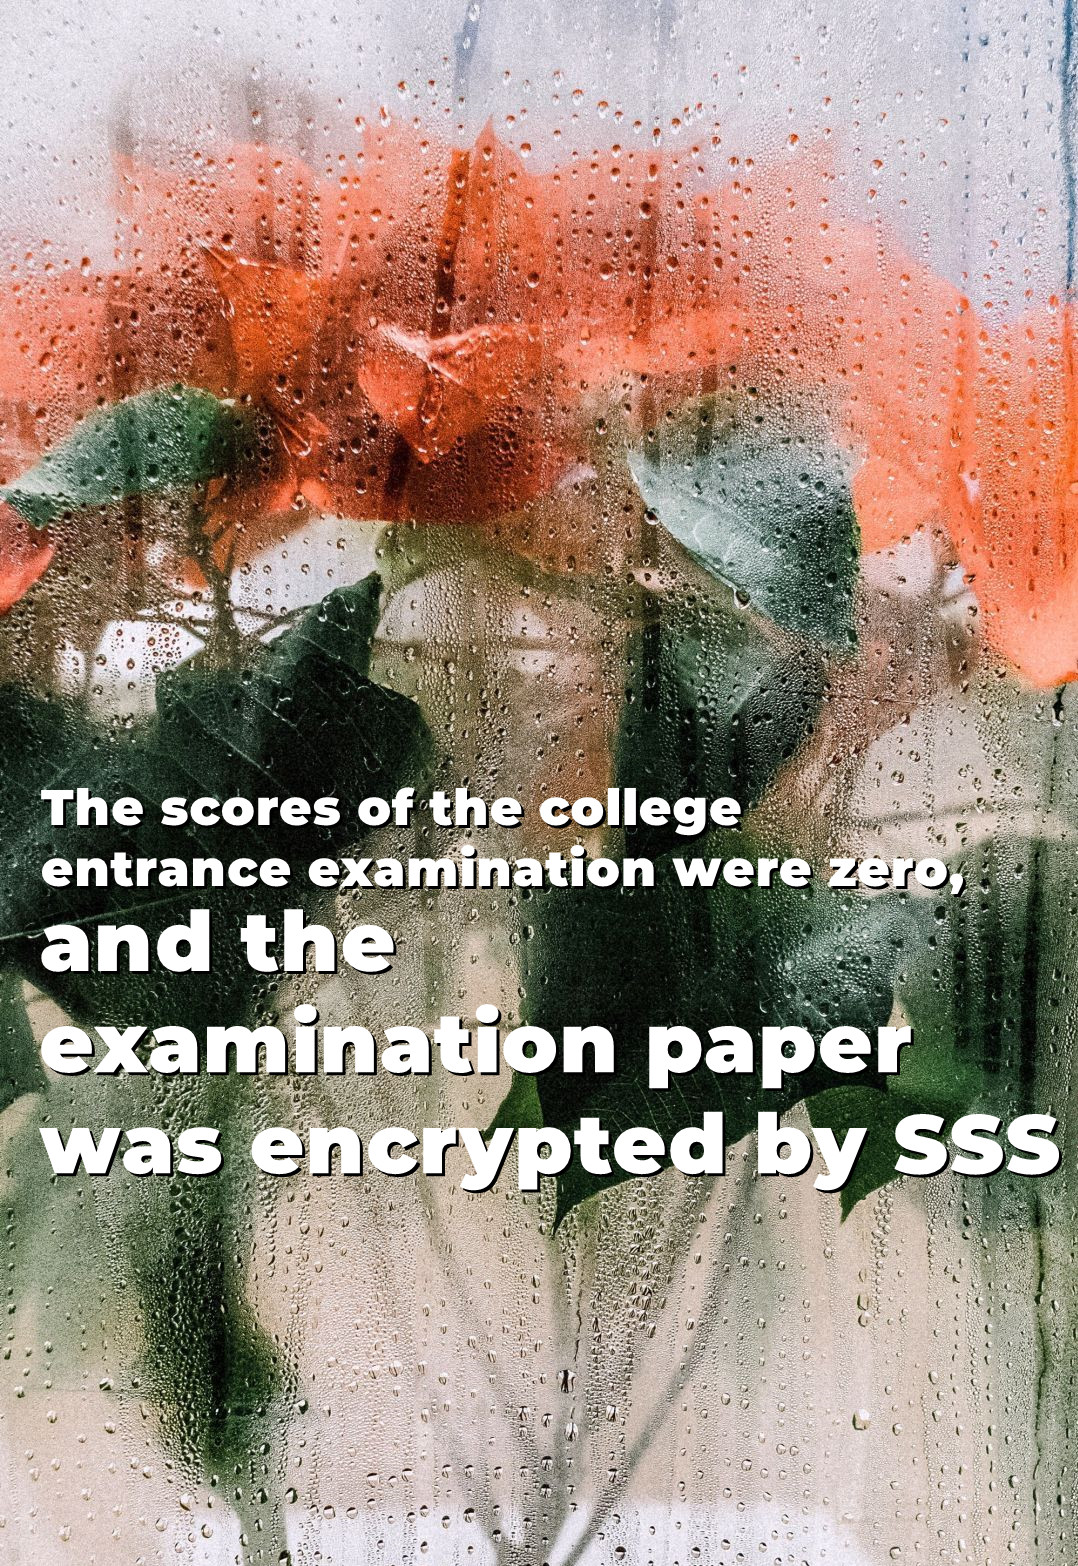 The scores of the college entrance examination were zero, and the examination paper was encrypted by SSS